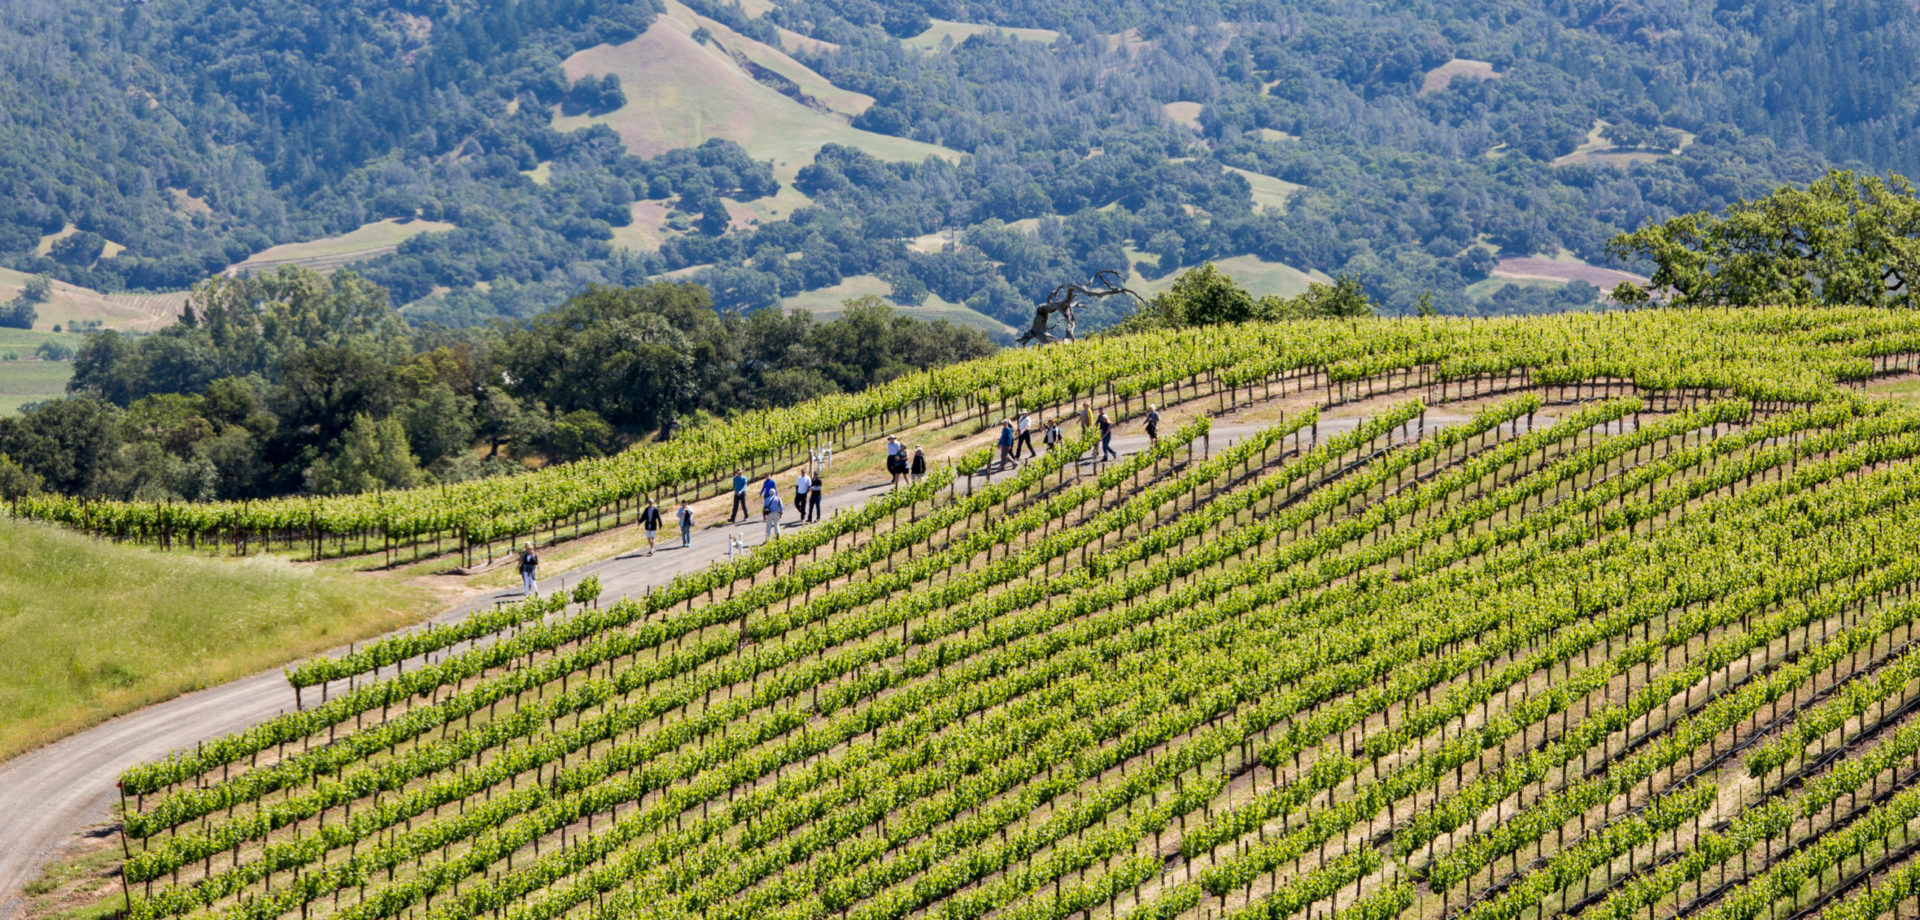 Sonoma landscape with vineyards, hills and people hiking